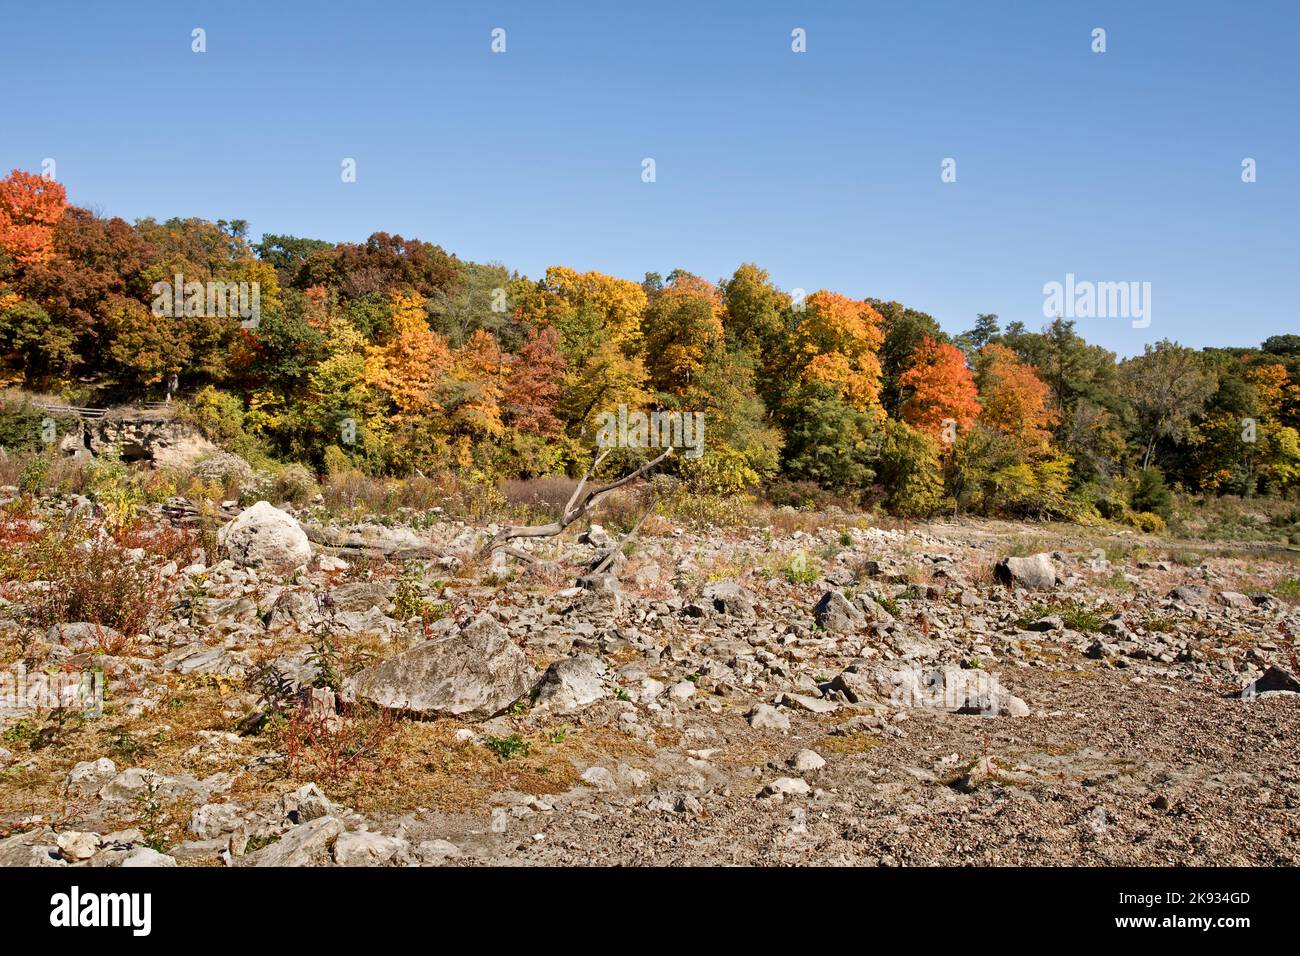 Autumn landscape with rocky ground in the foreground and fall foliage in the trees and blue sky in the background. Stock Photo